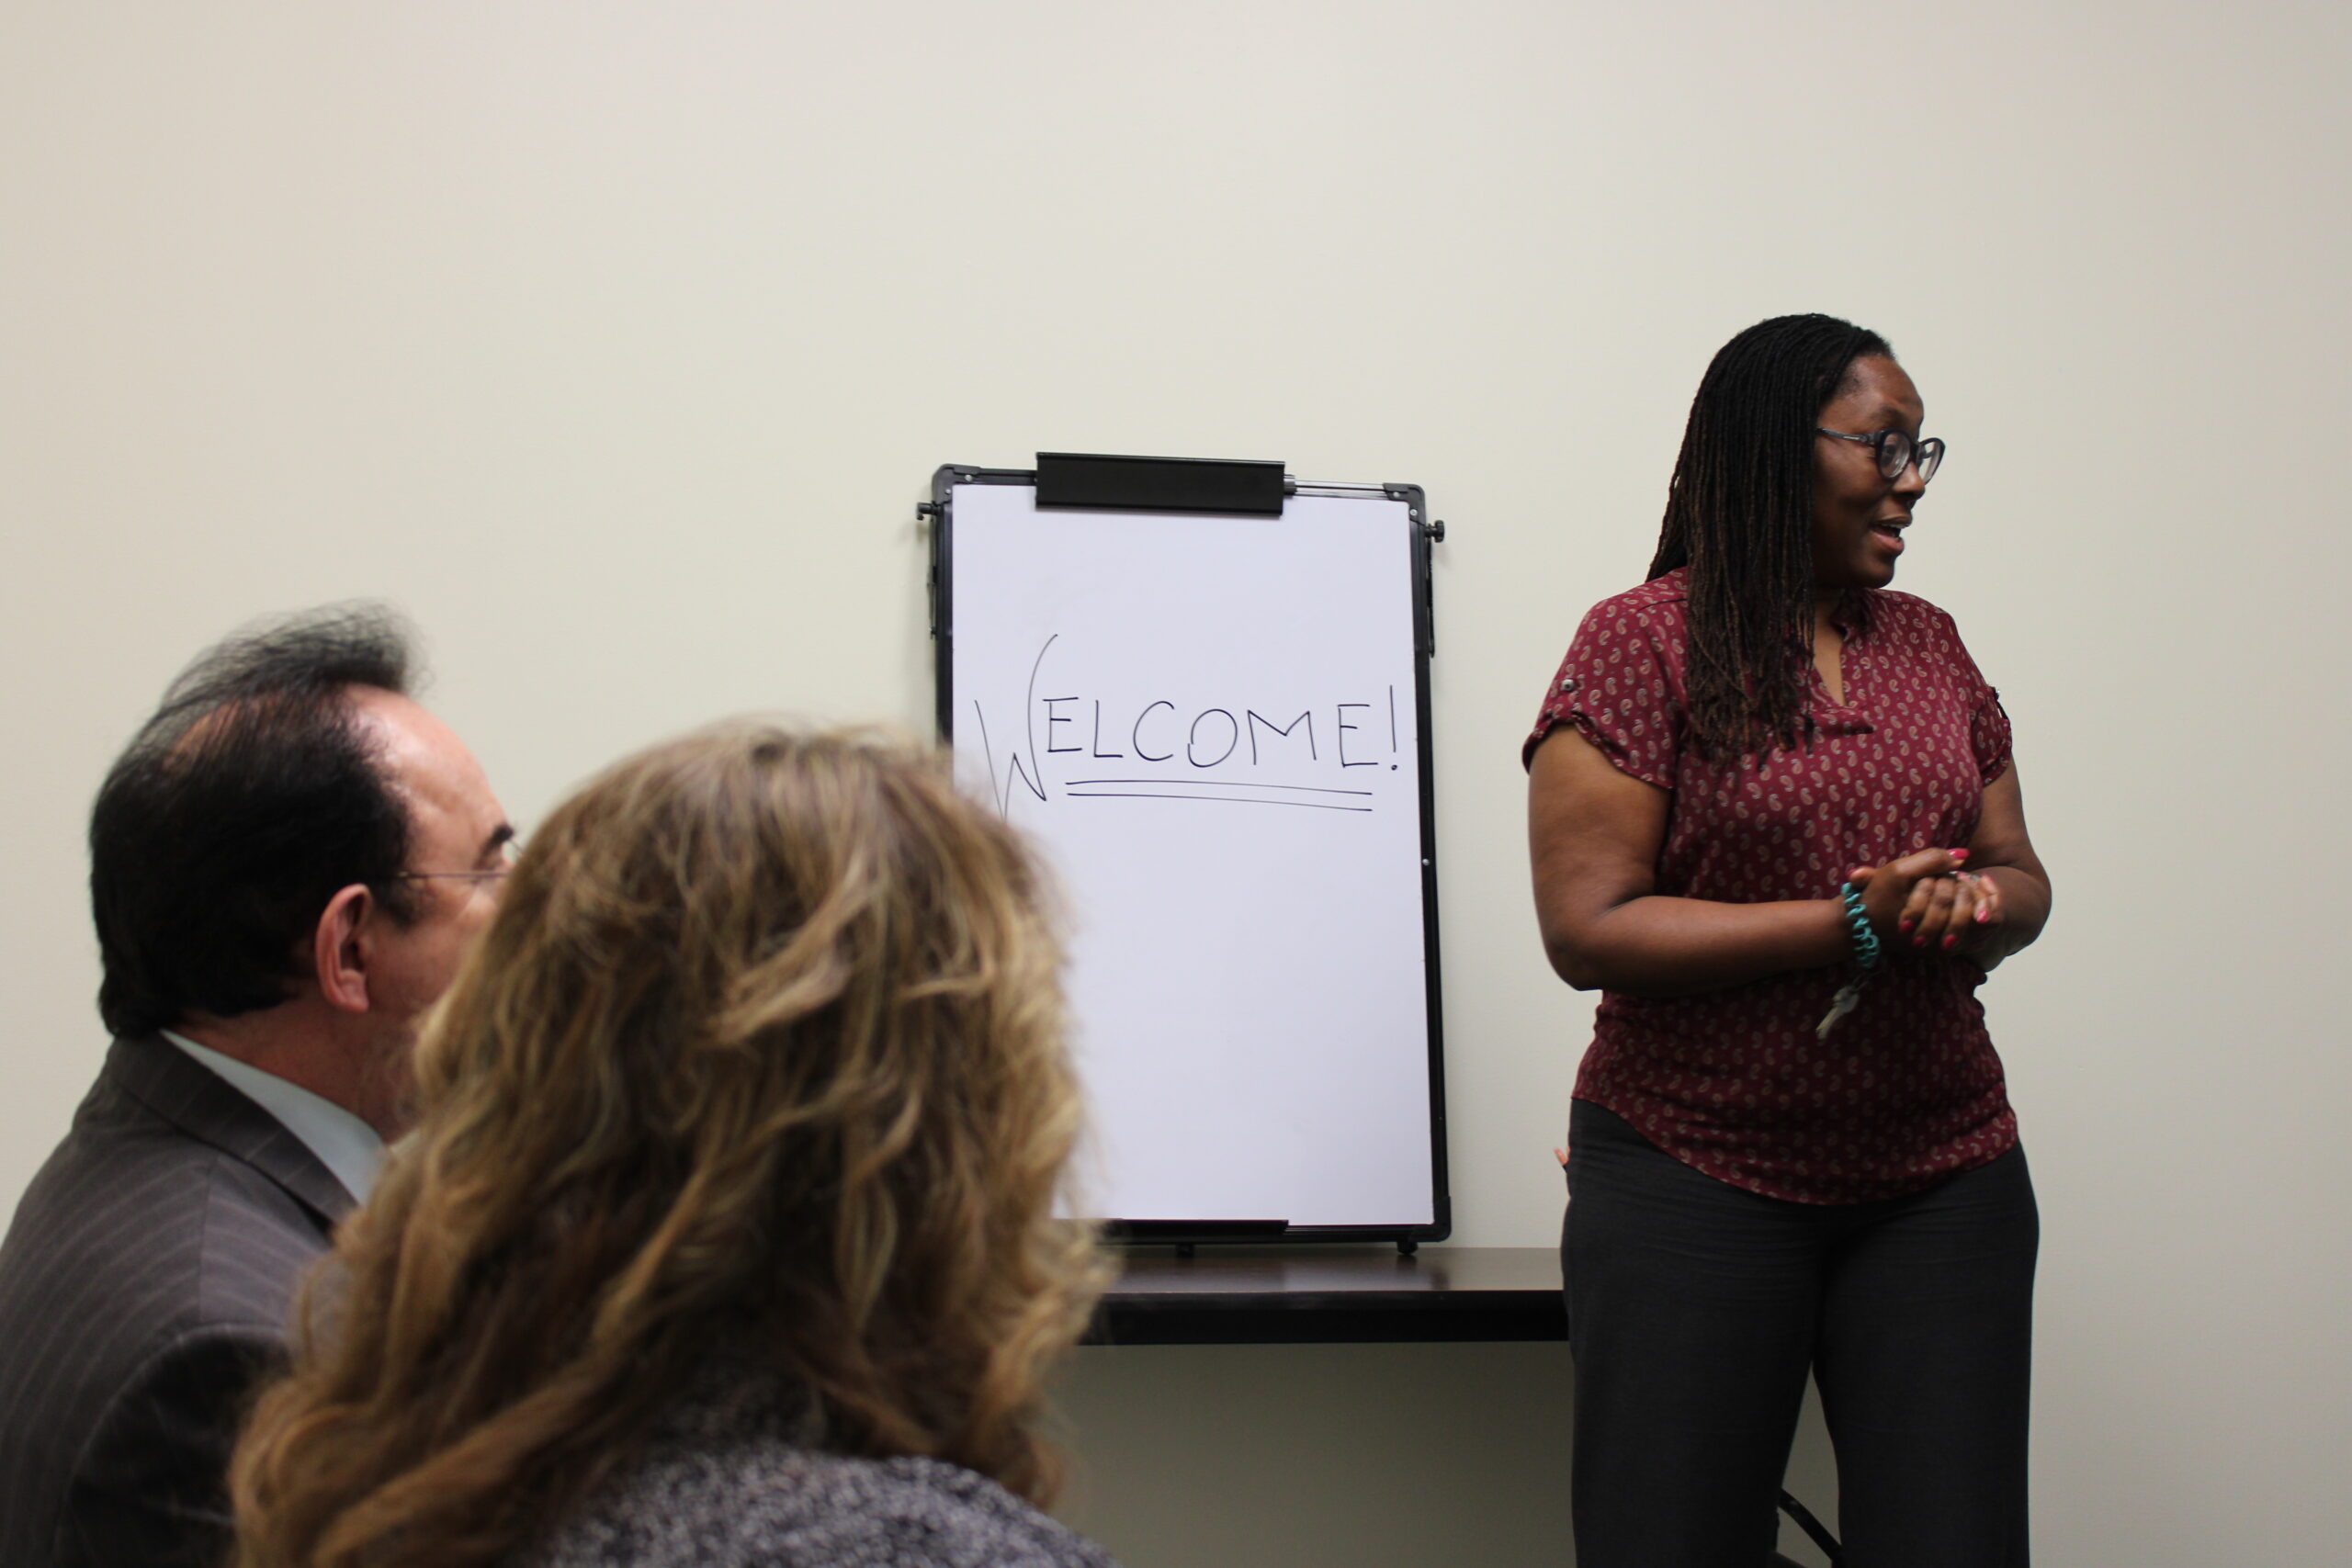 woman standing at whiteboard with welcome written on board with people looking on